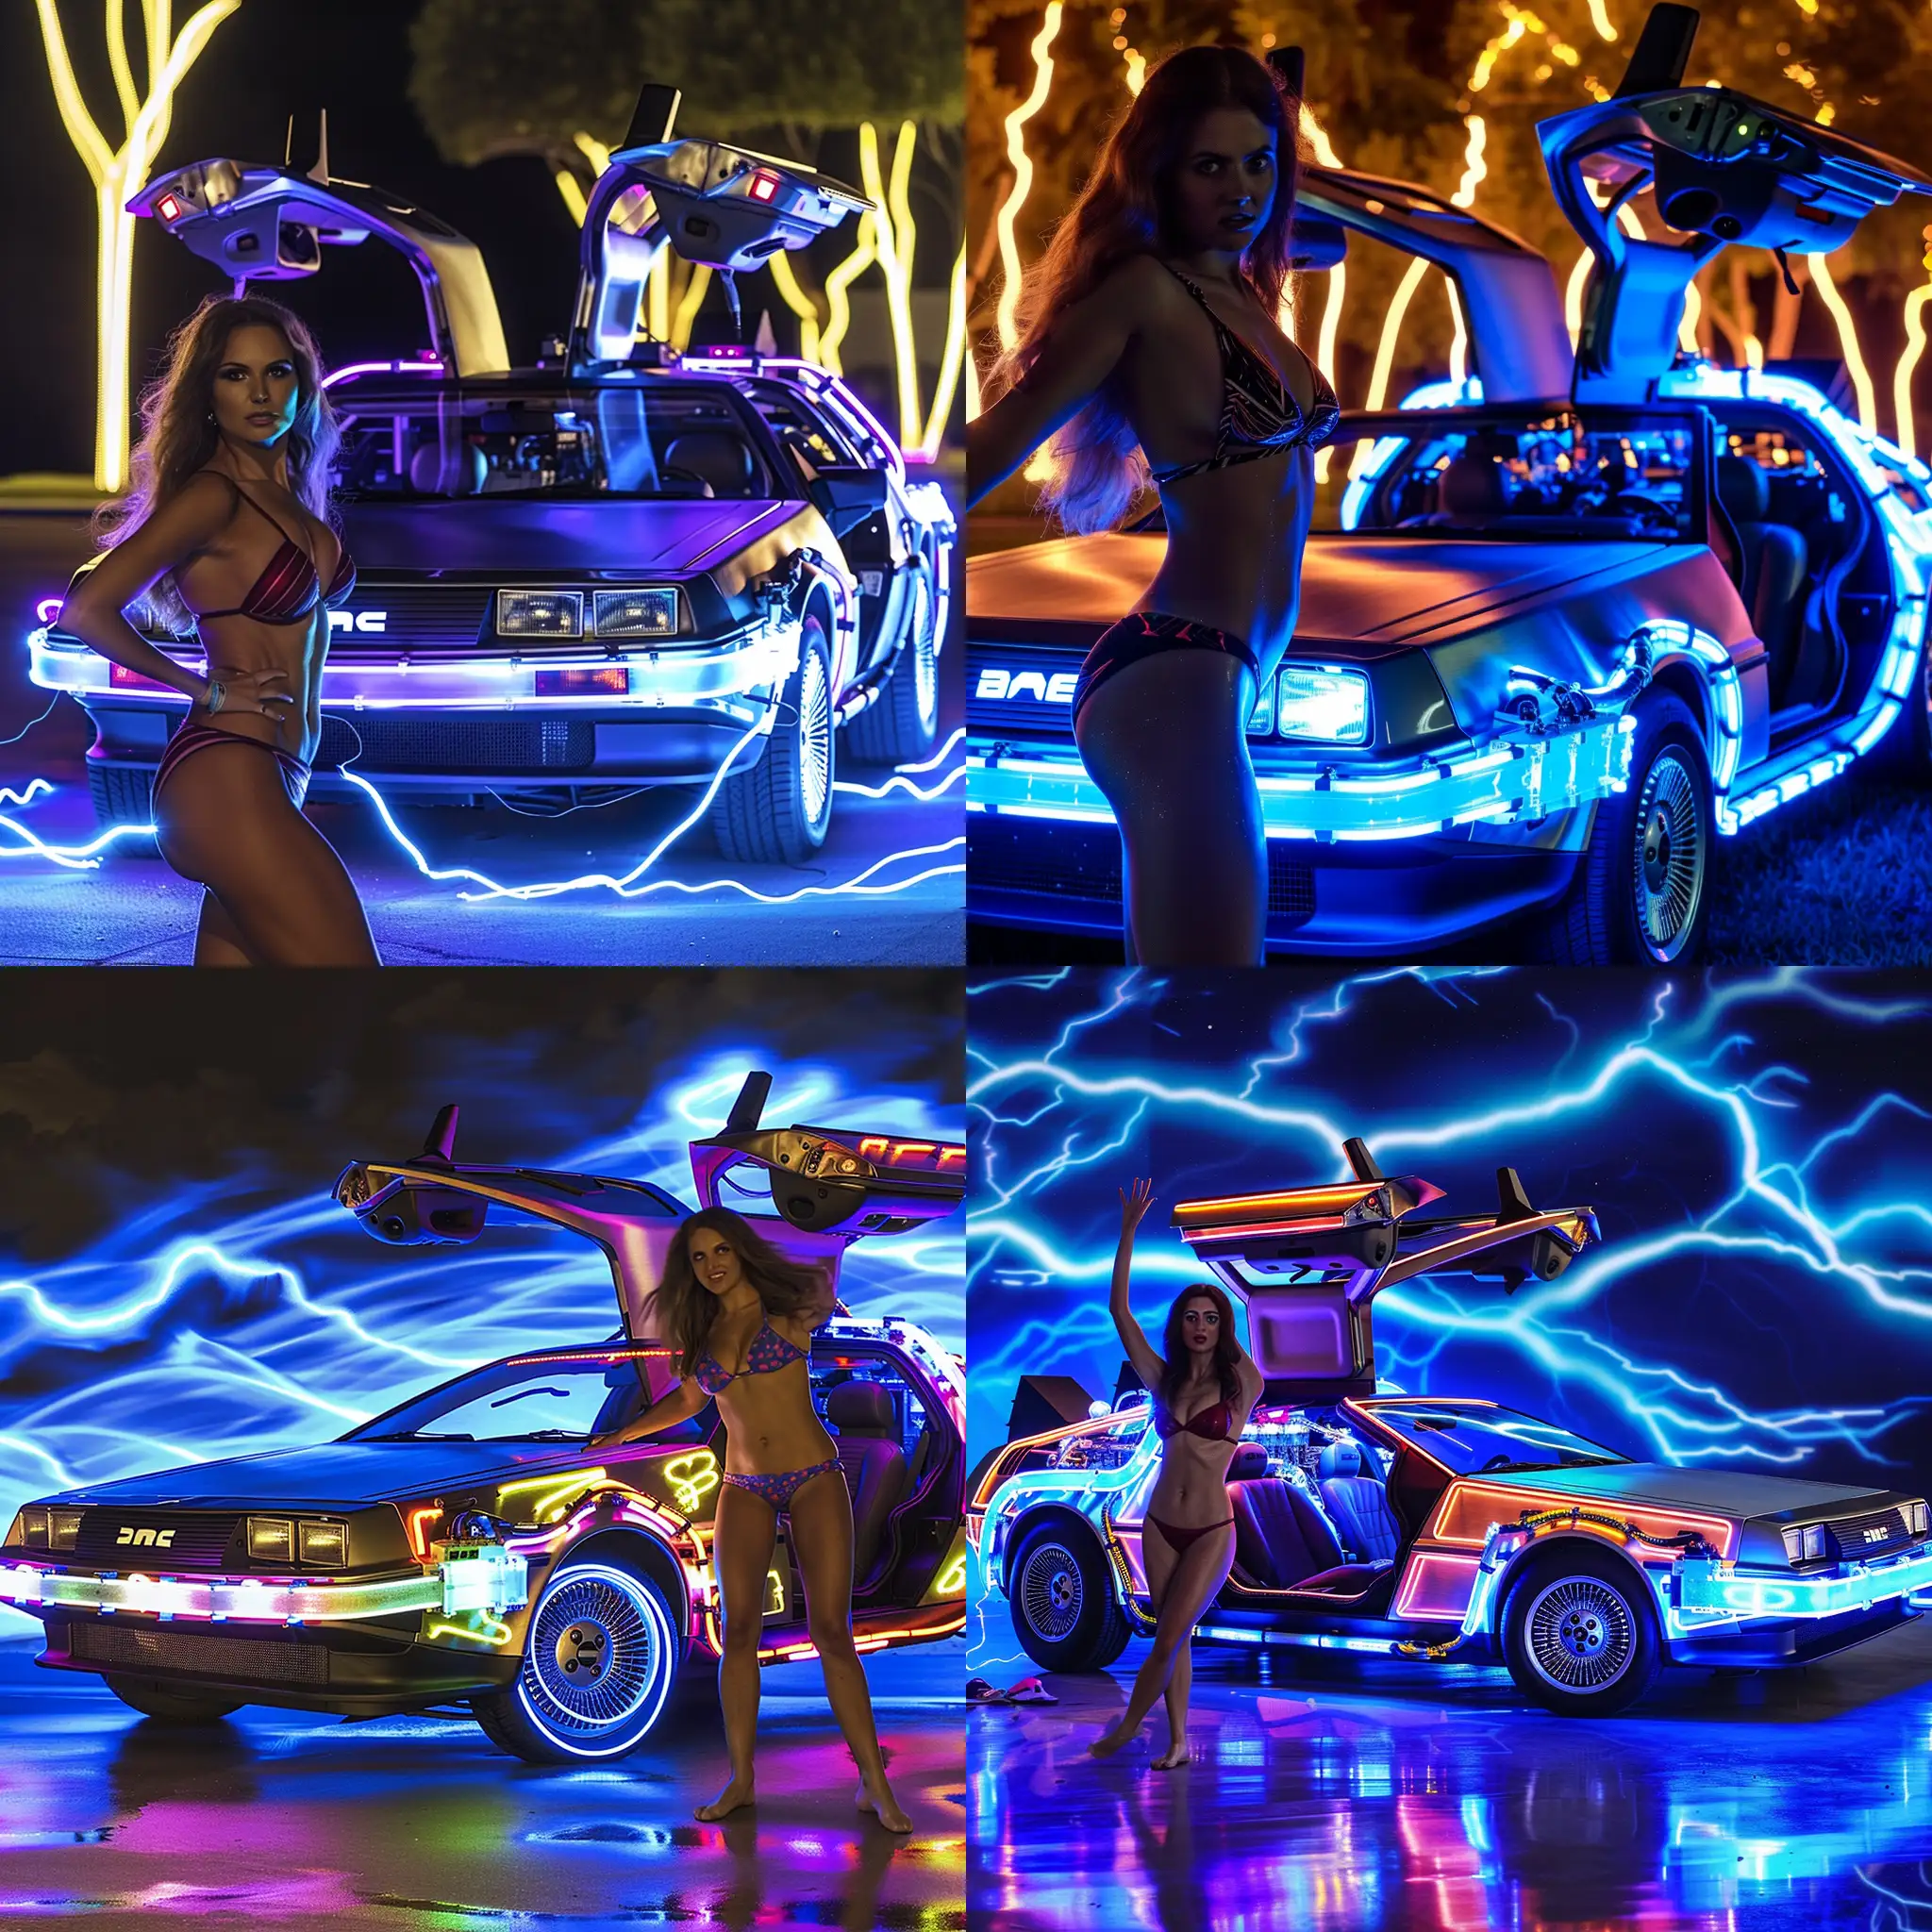 Back to the Future Delorean lit up with neon, fire trails, blue lightning, artistic with attractive woman in bikini in foreground